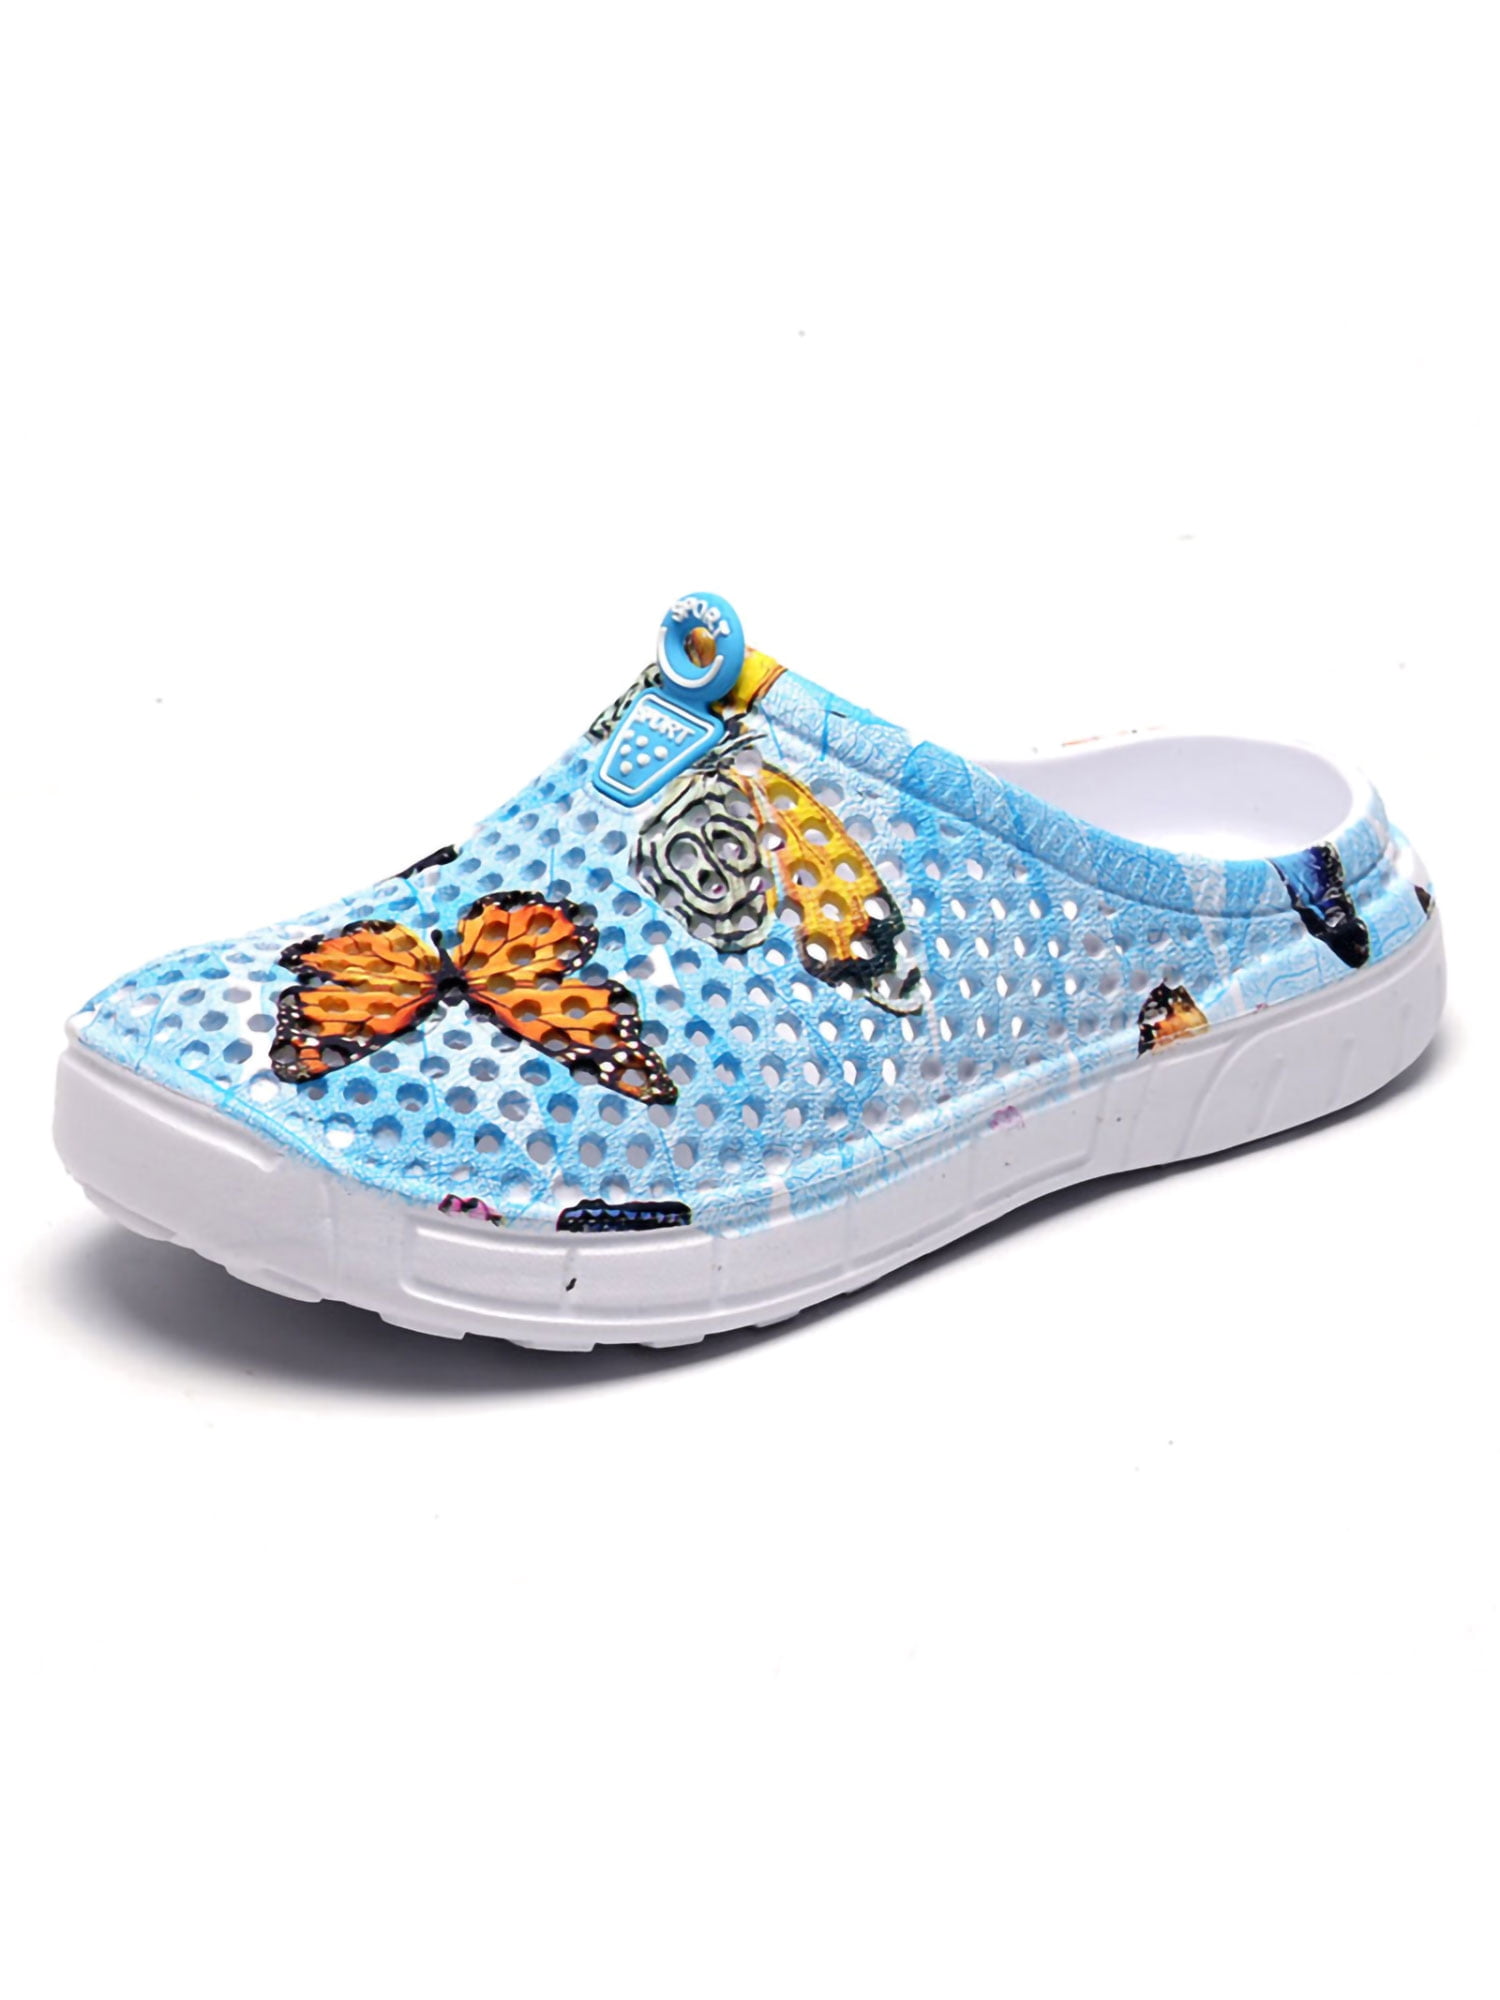 Mens Mesh Sandals Summer Beach Shoes Casual Breathable Slippers Shoes